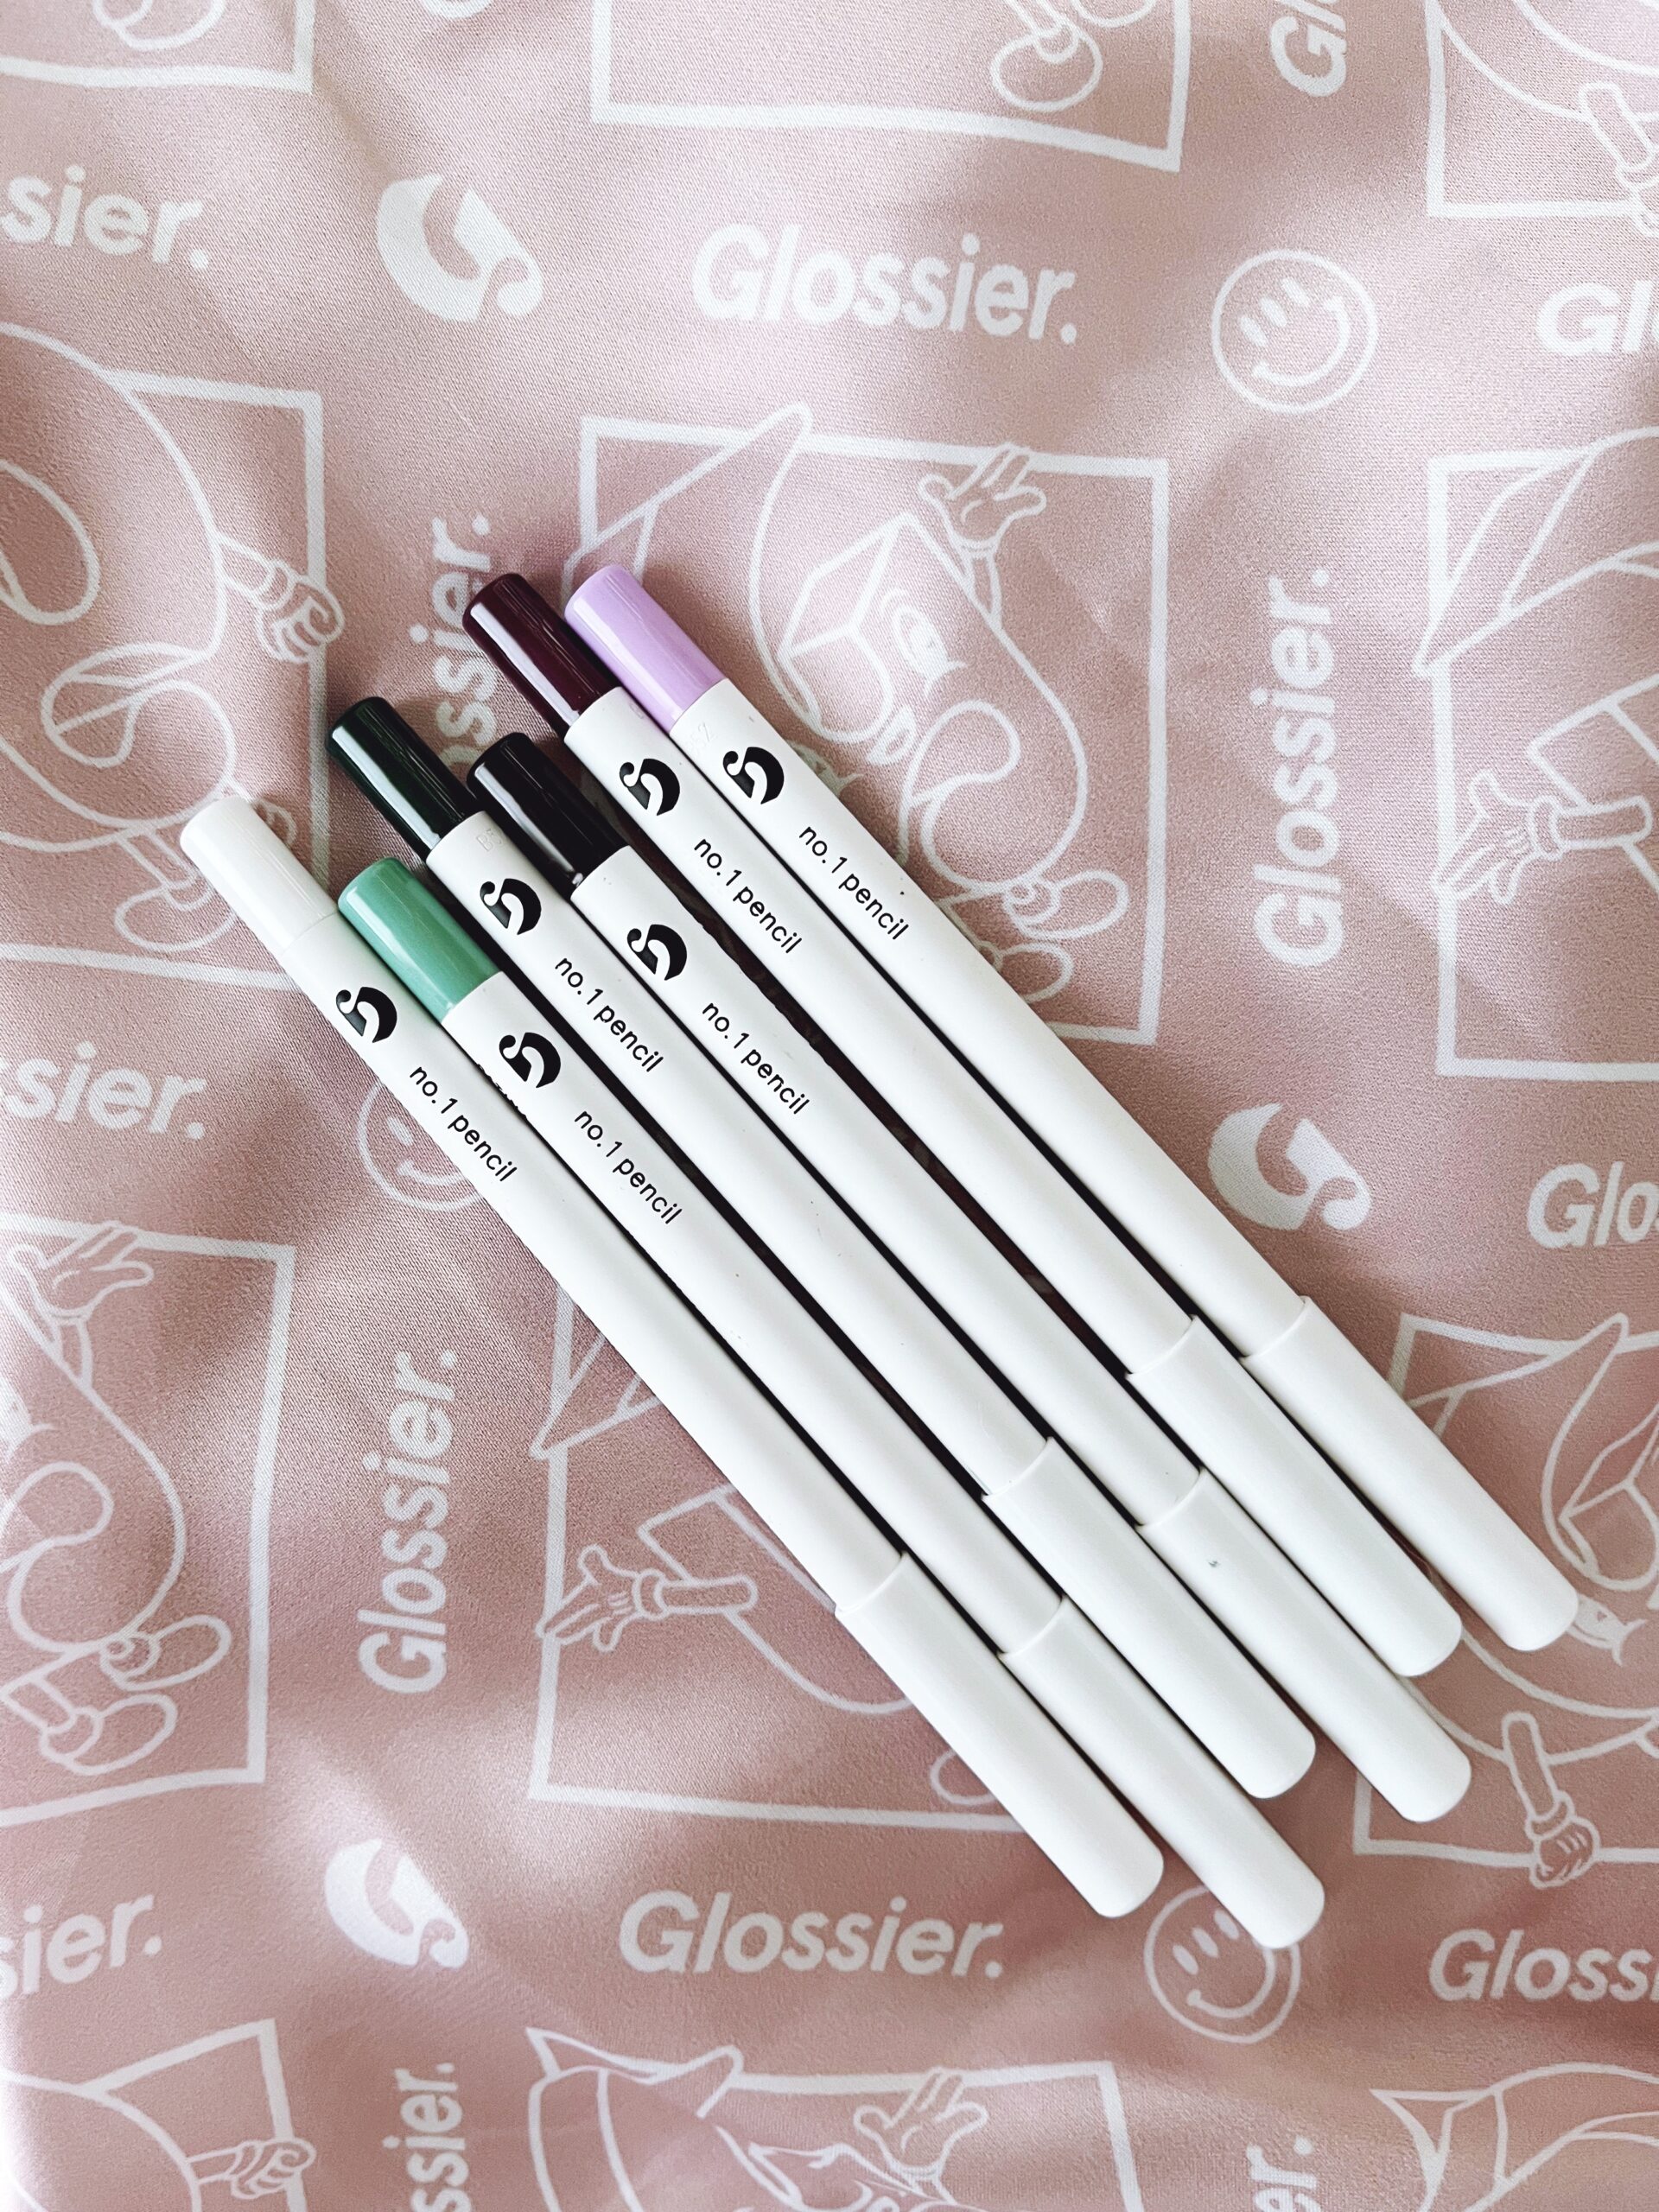 Glossier No. 1 Pencil review by The Beauty Minimalist